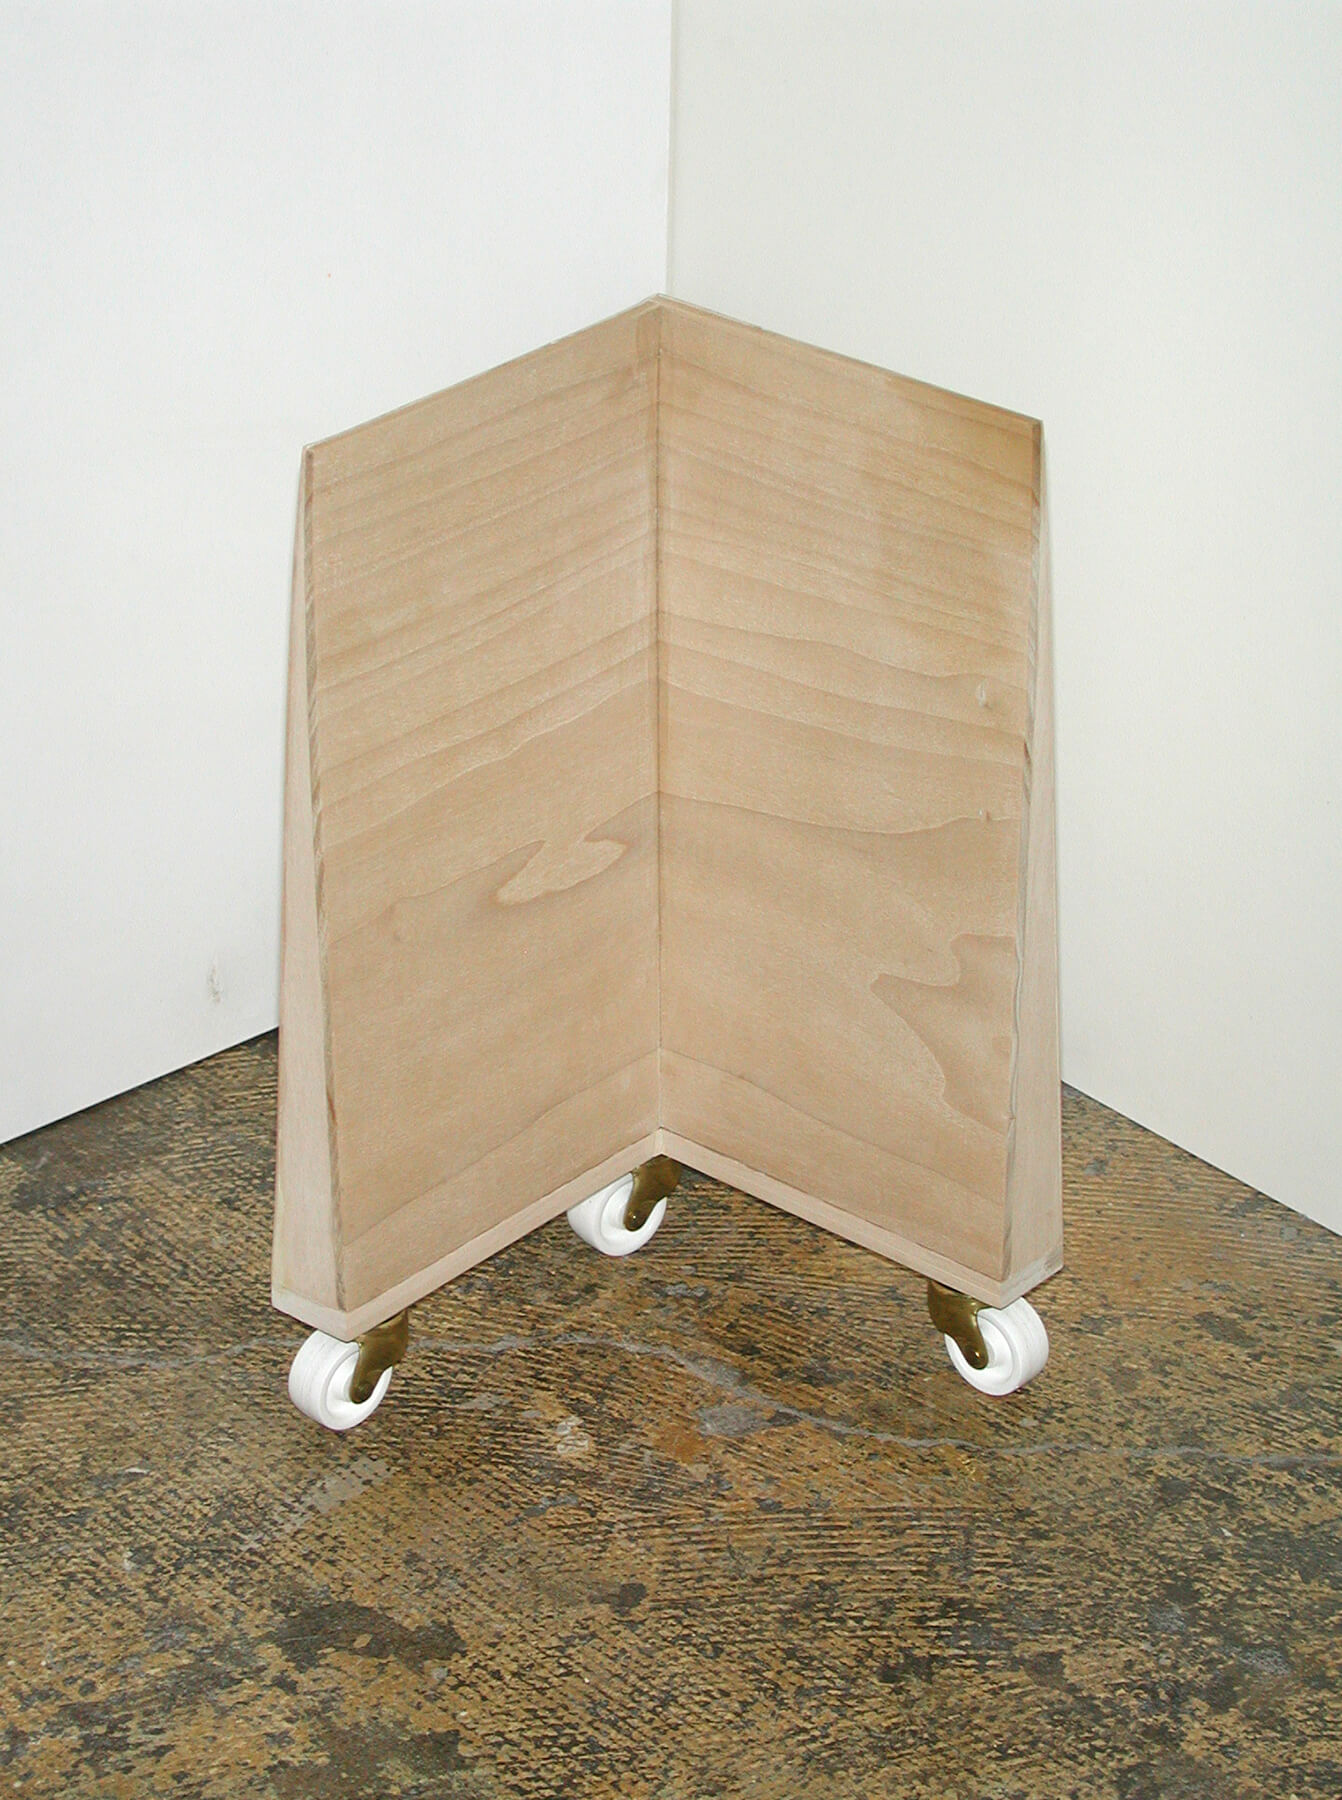 Wood, casters, 7 x 7 x 14 in, 2004